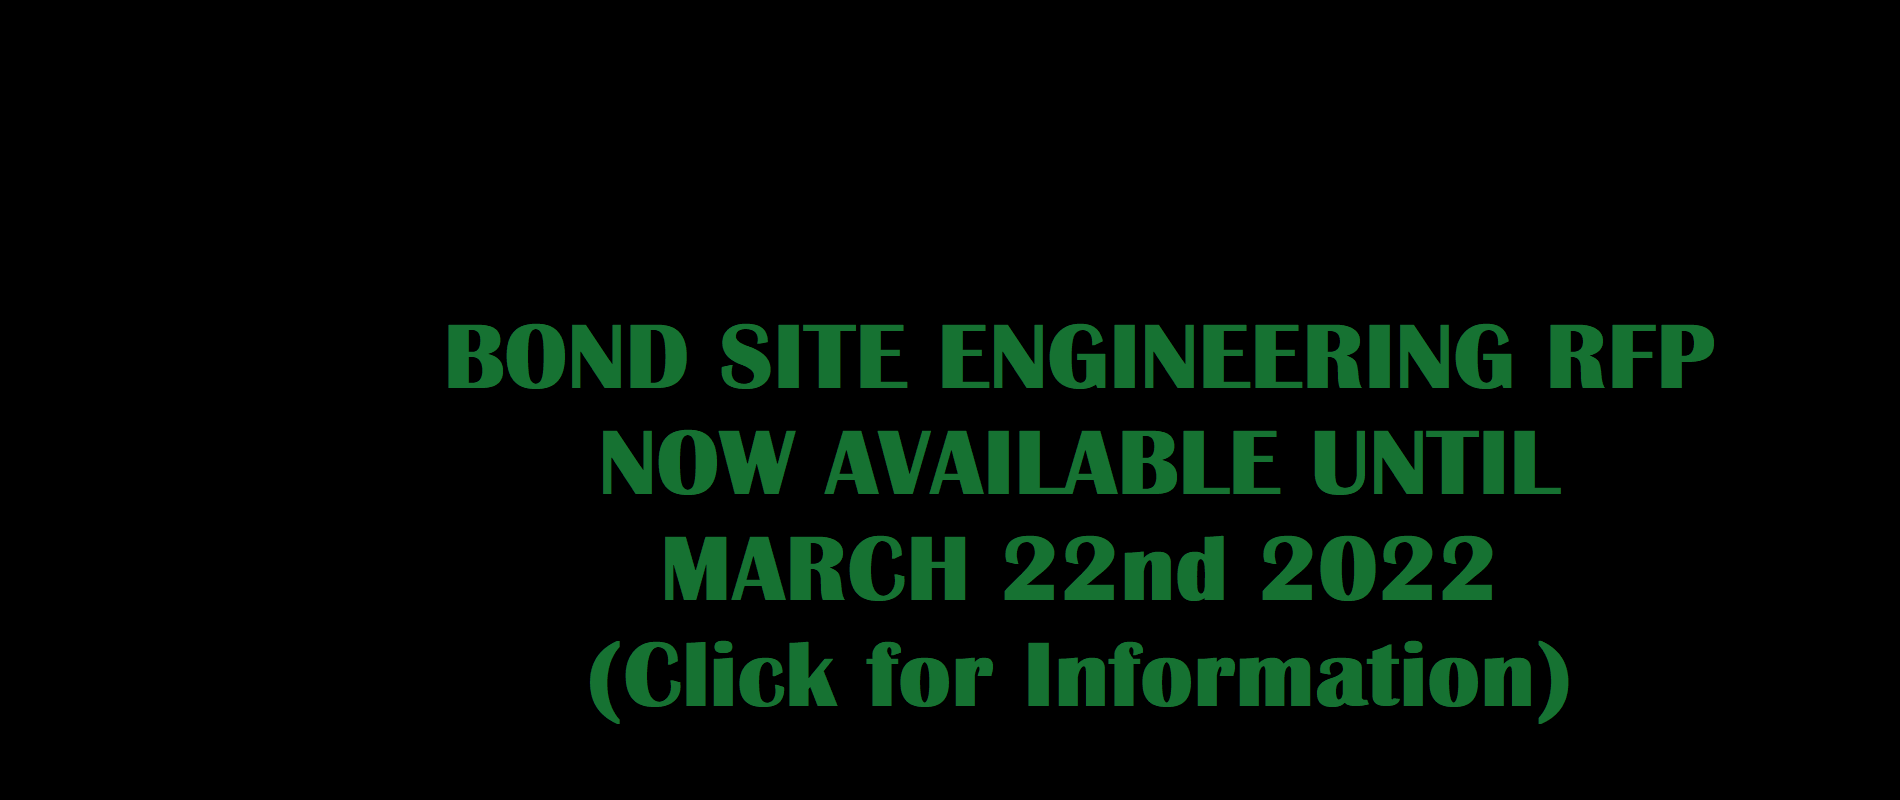 BOND SITE ENGINEERING RFP NOW AVAILABLE UNTIL MARCH 22nd 2022